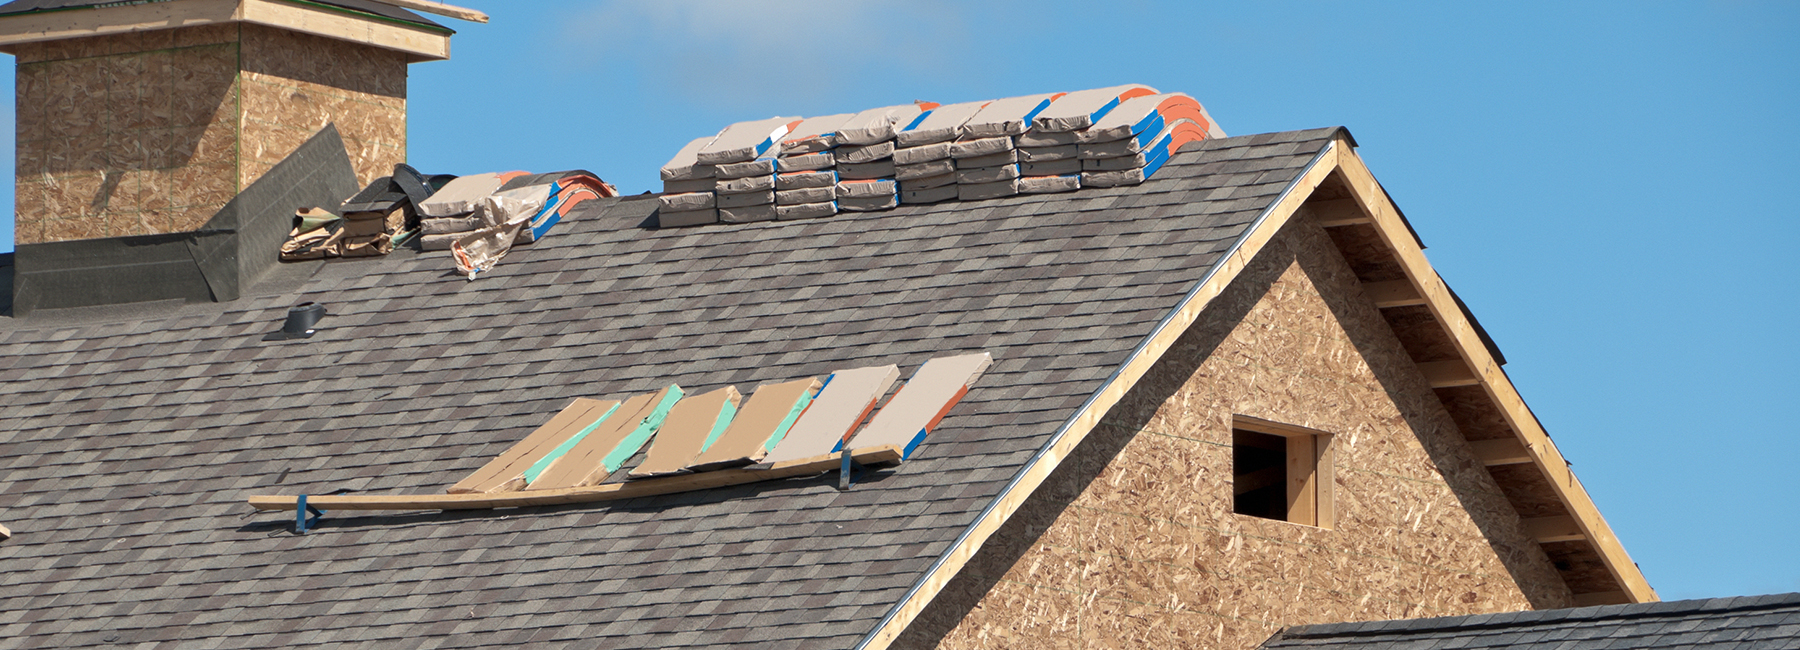 Myrtle Beach Roofing Company